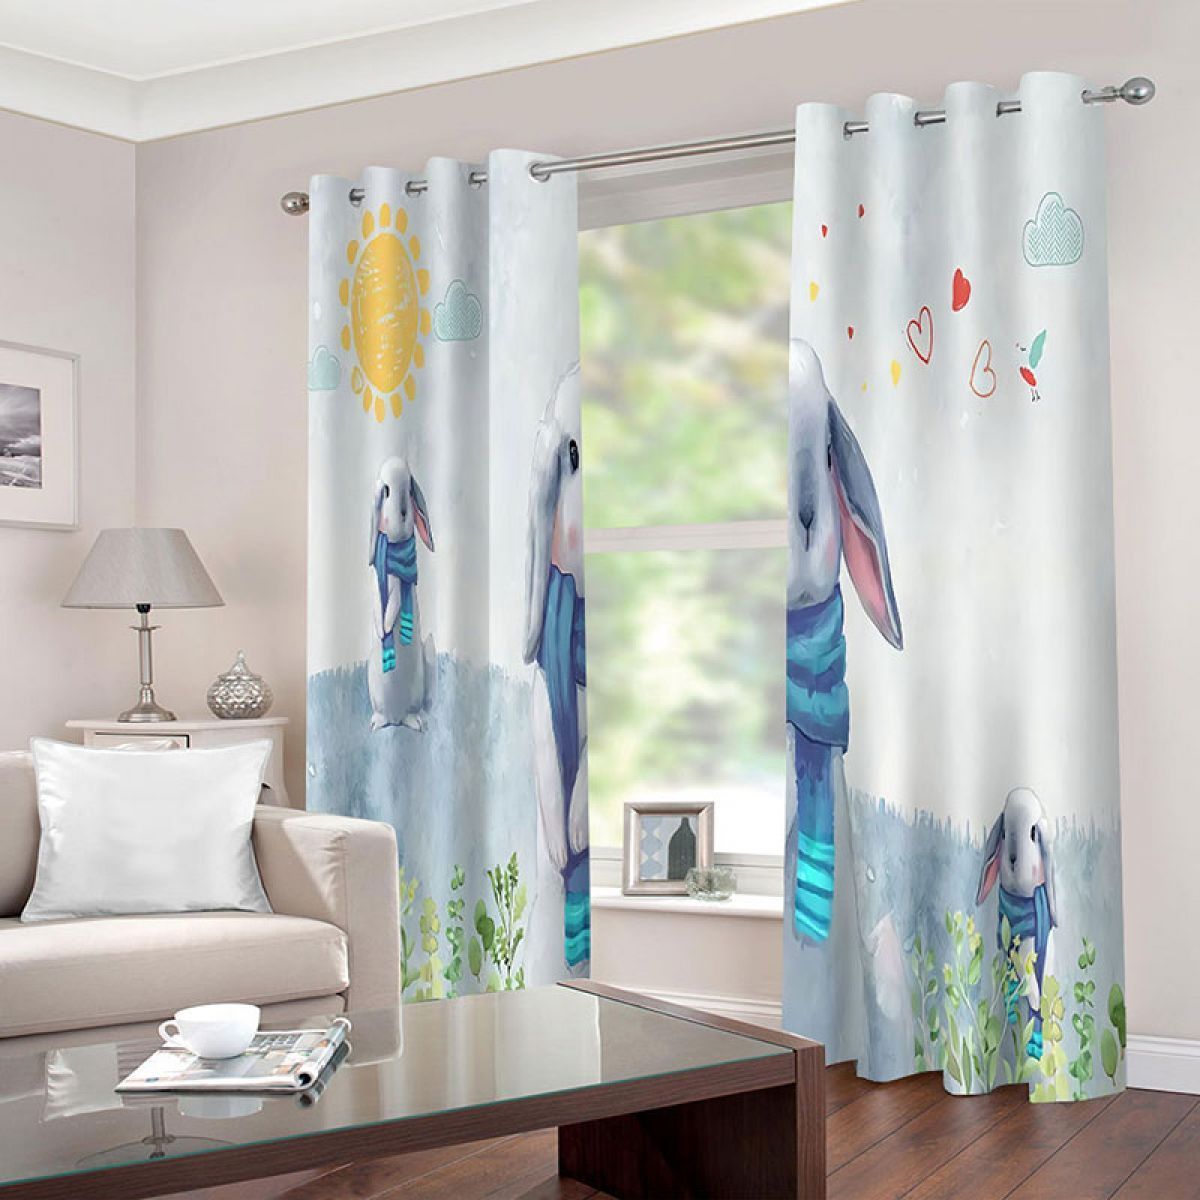 3d Rabbits Playing On Sunny Day Printed Window Curtain Home Decor